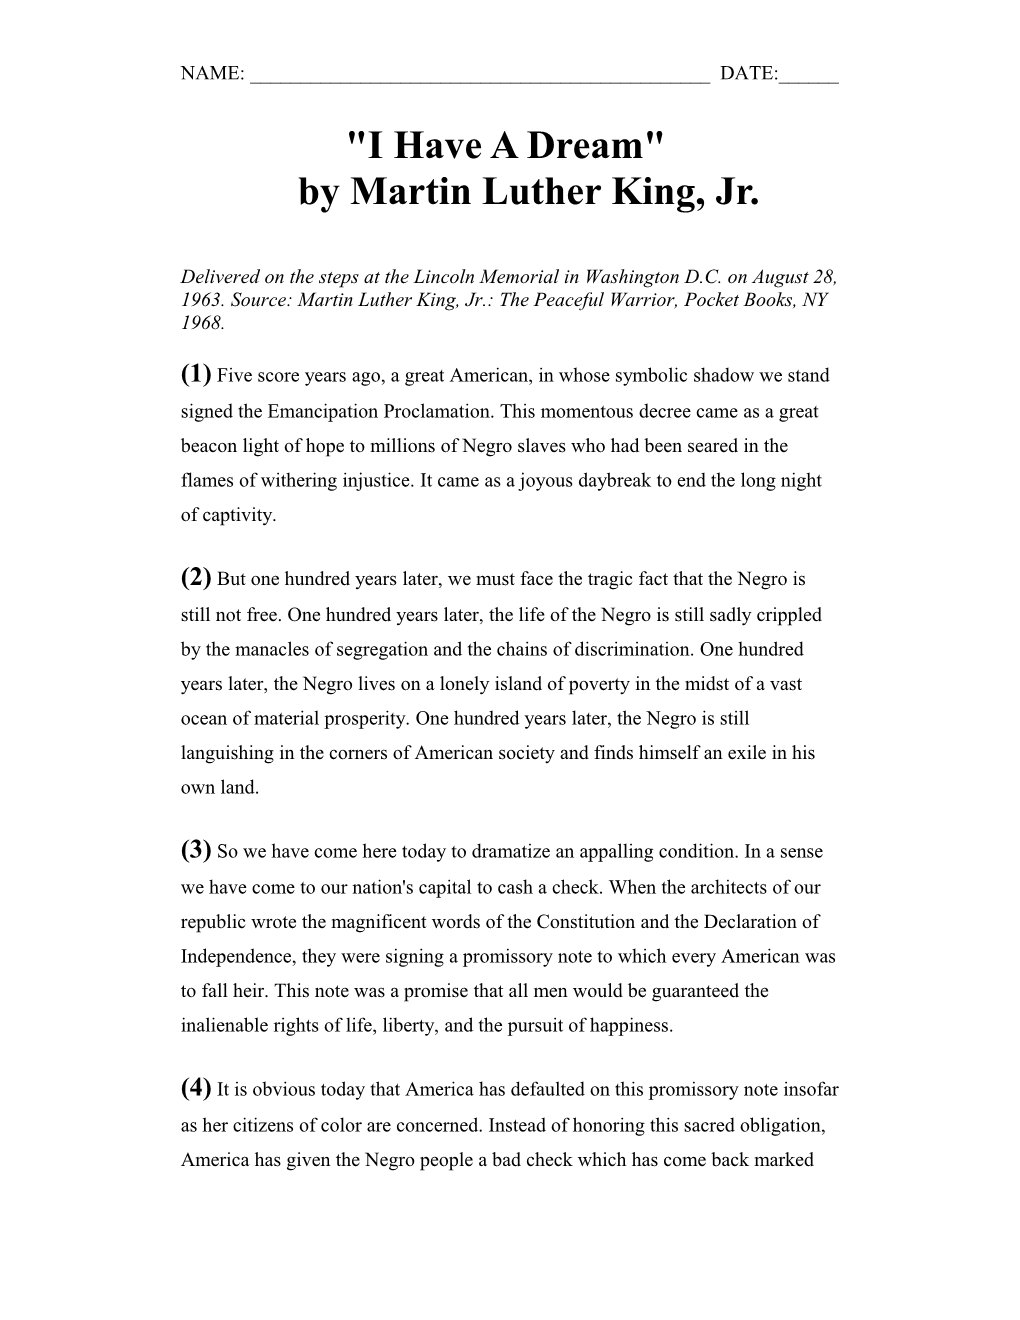 I Have a Dream by Martin Luther King, Jr